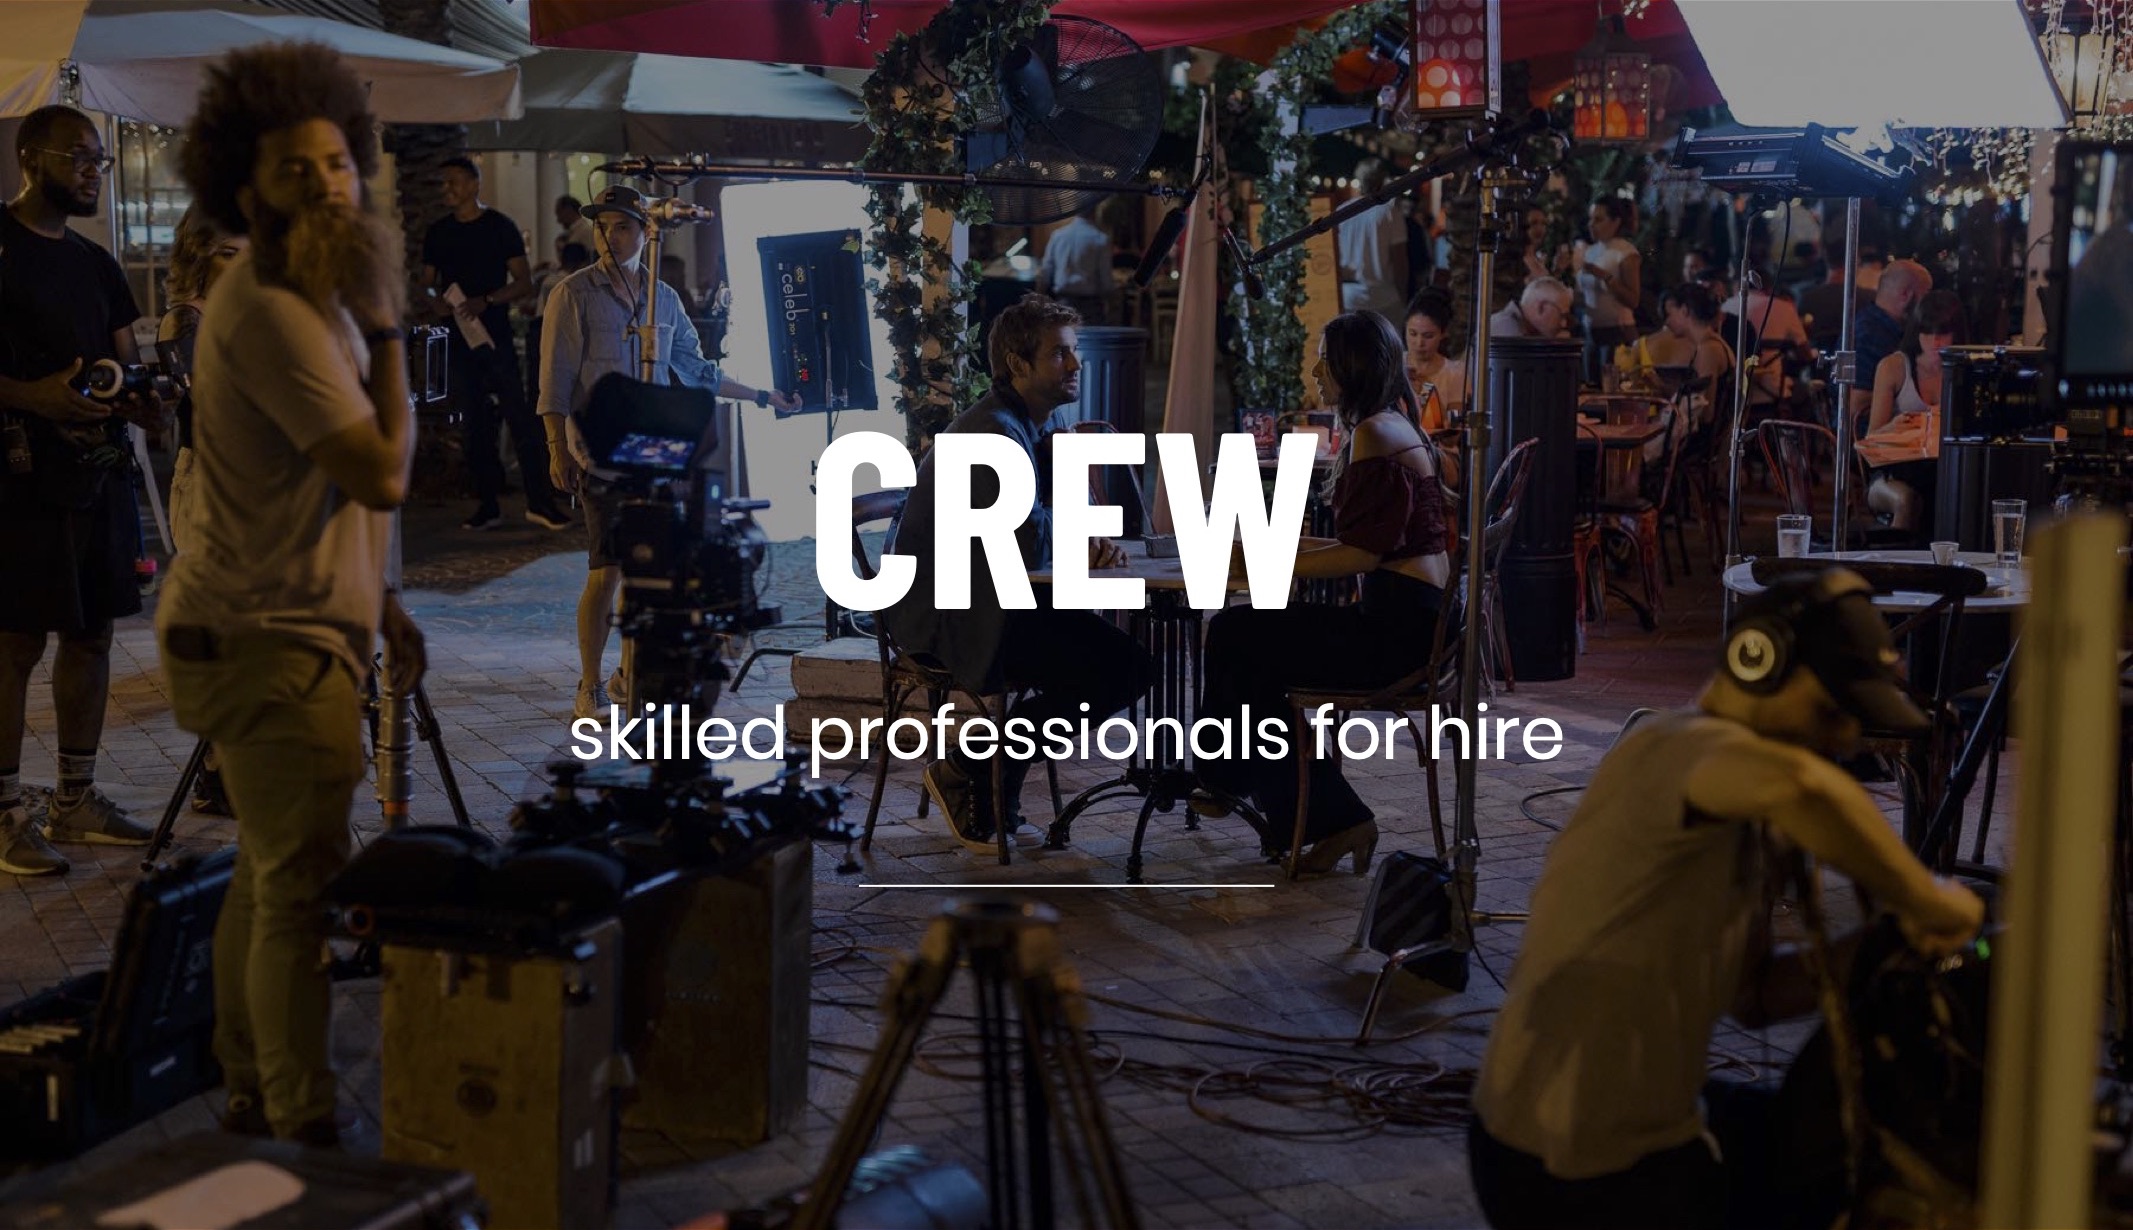 IU C&I Studios Page Production Resources White Crew skilled professionals for hire title on backdrop of crew surrounding a set with a man and woman sitting at a table